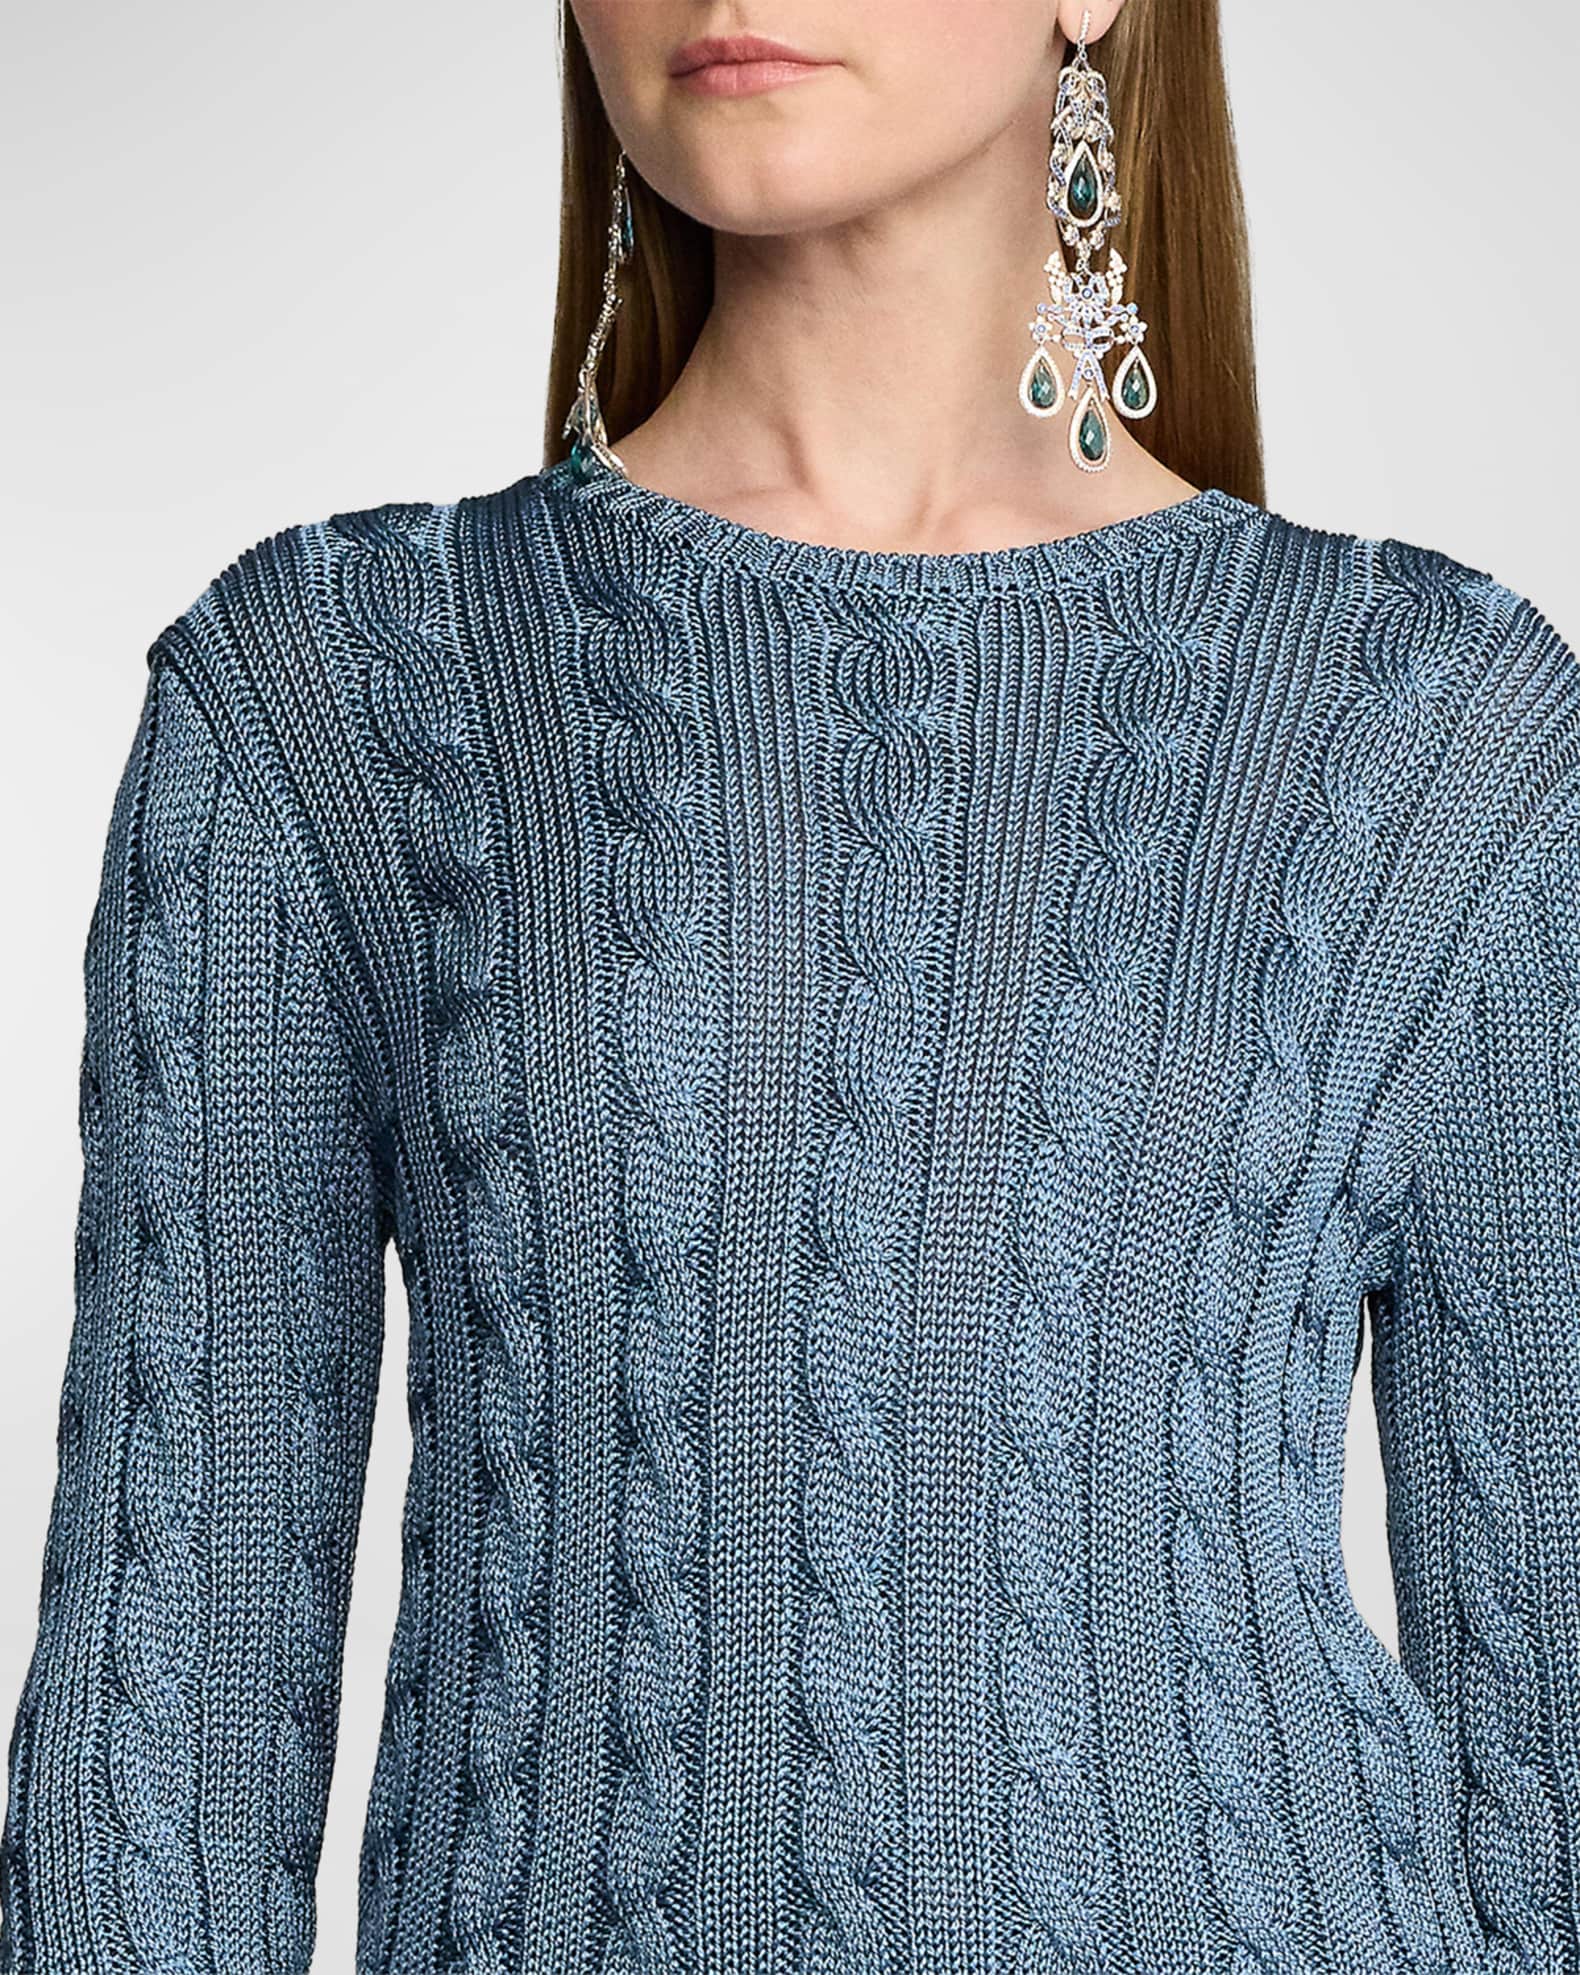 Ralph Lauren Collection High Shine Silk Cable Knit Crewneck Sweater, Blue, Women's, M, Sweaters Cable-Knit Sweaters